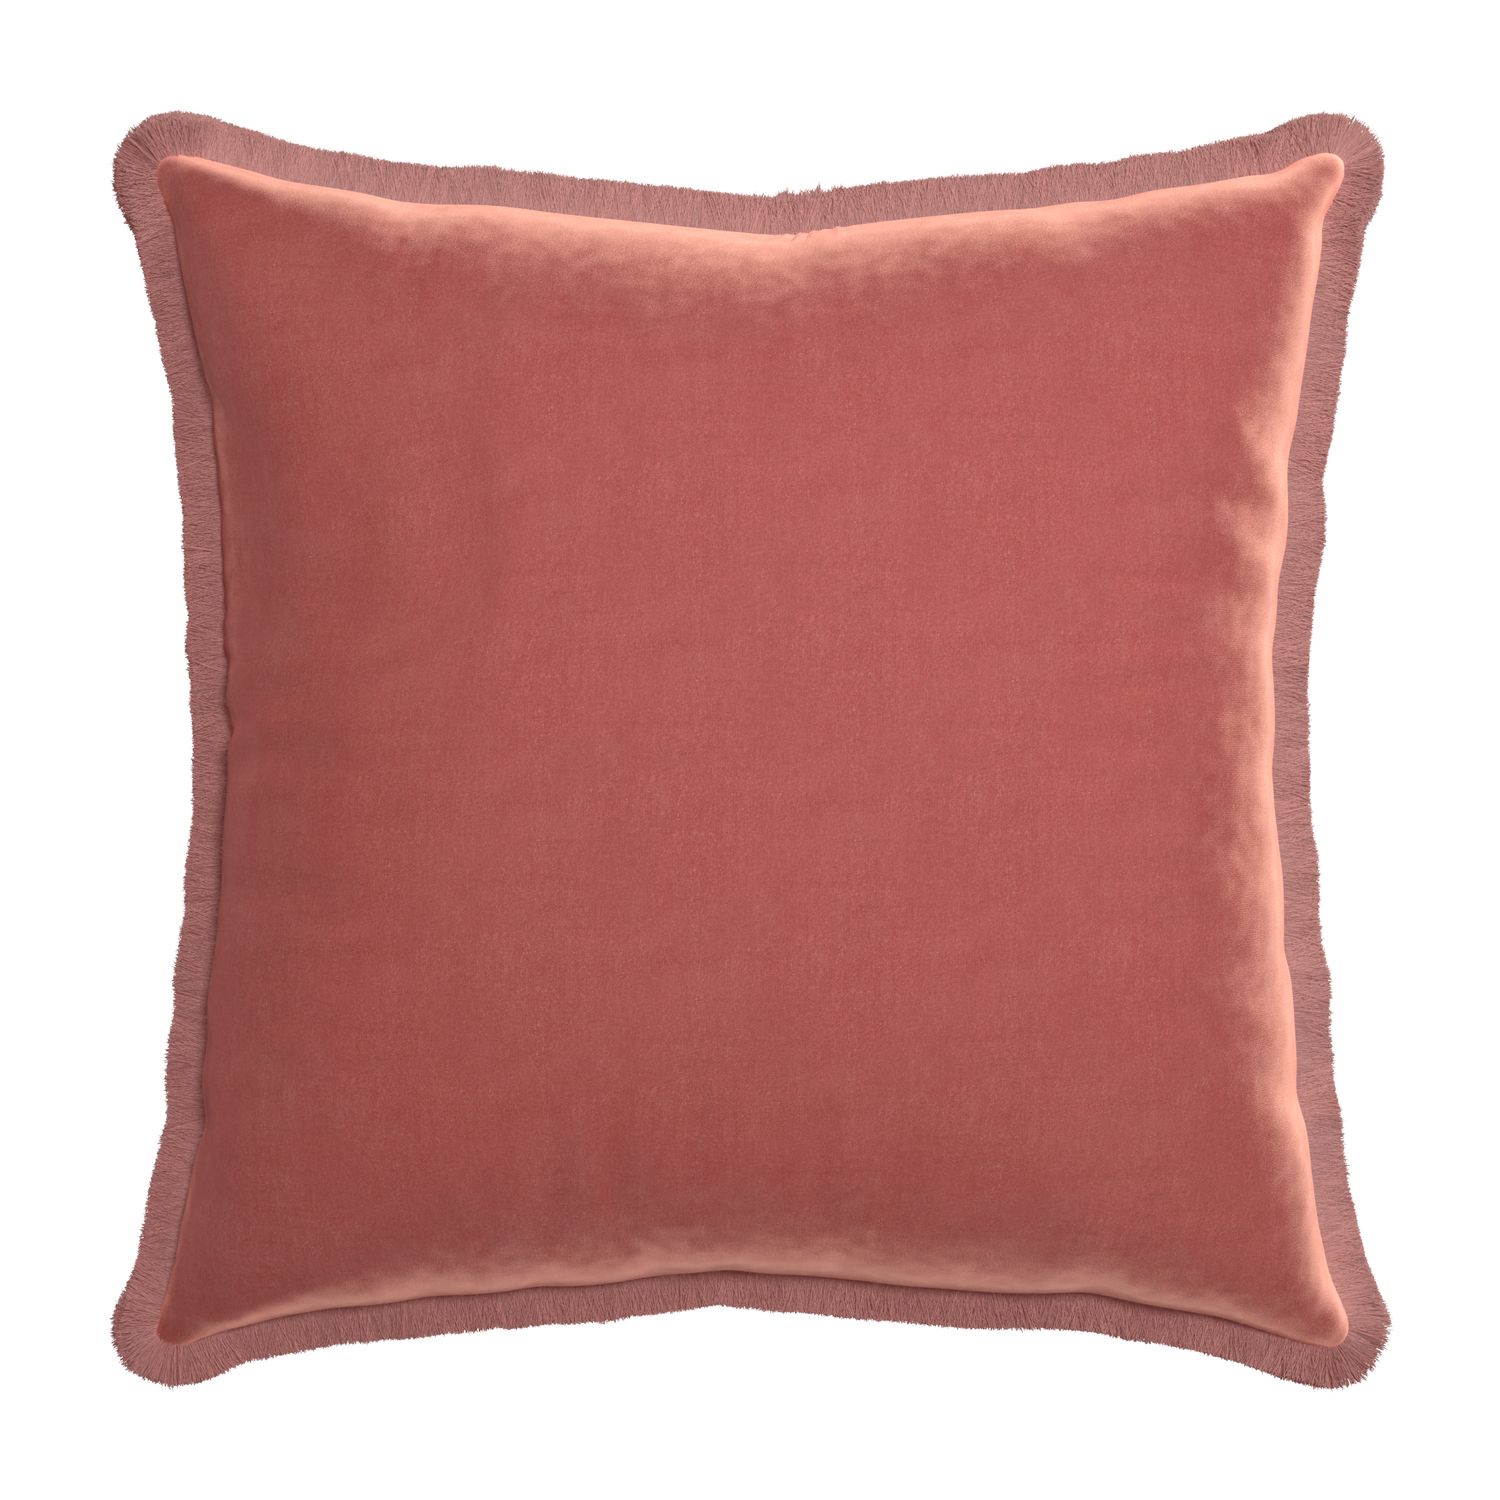 square coral velvet pillow with dusty rose fringe